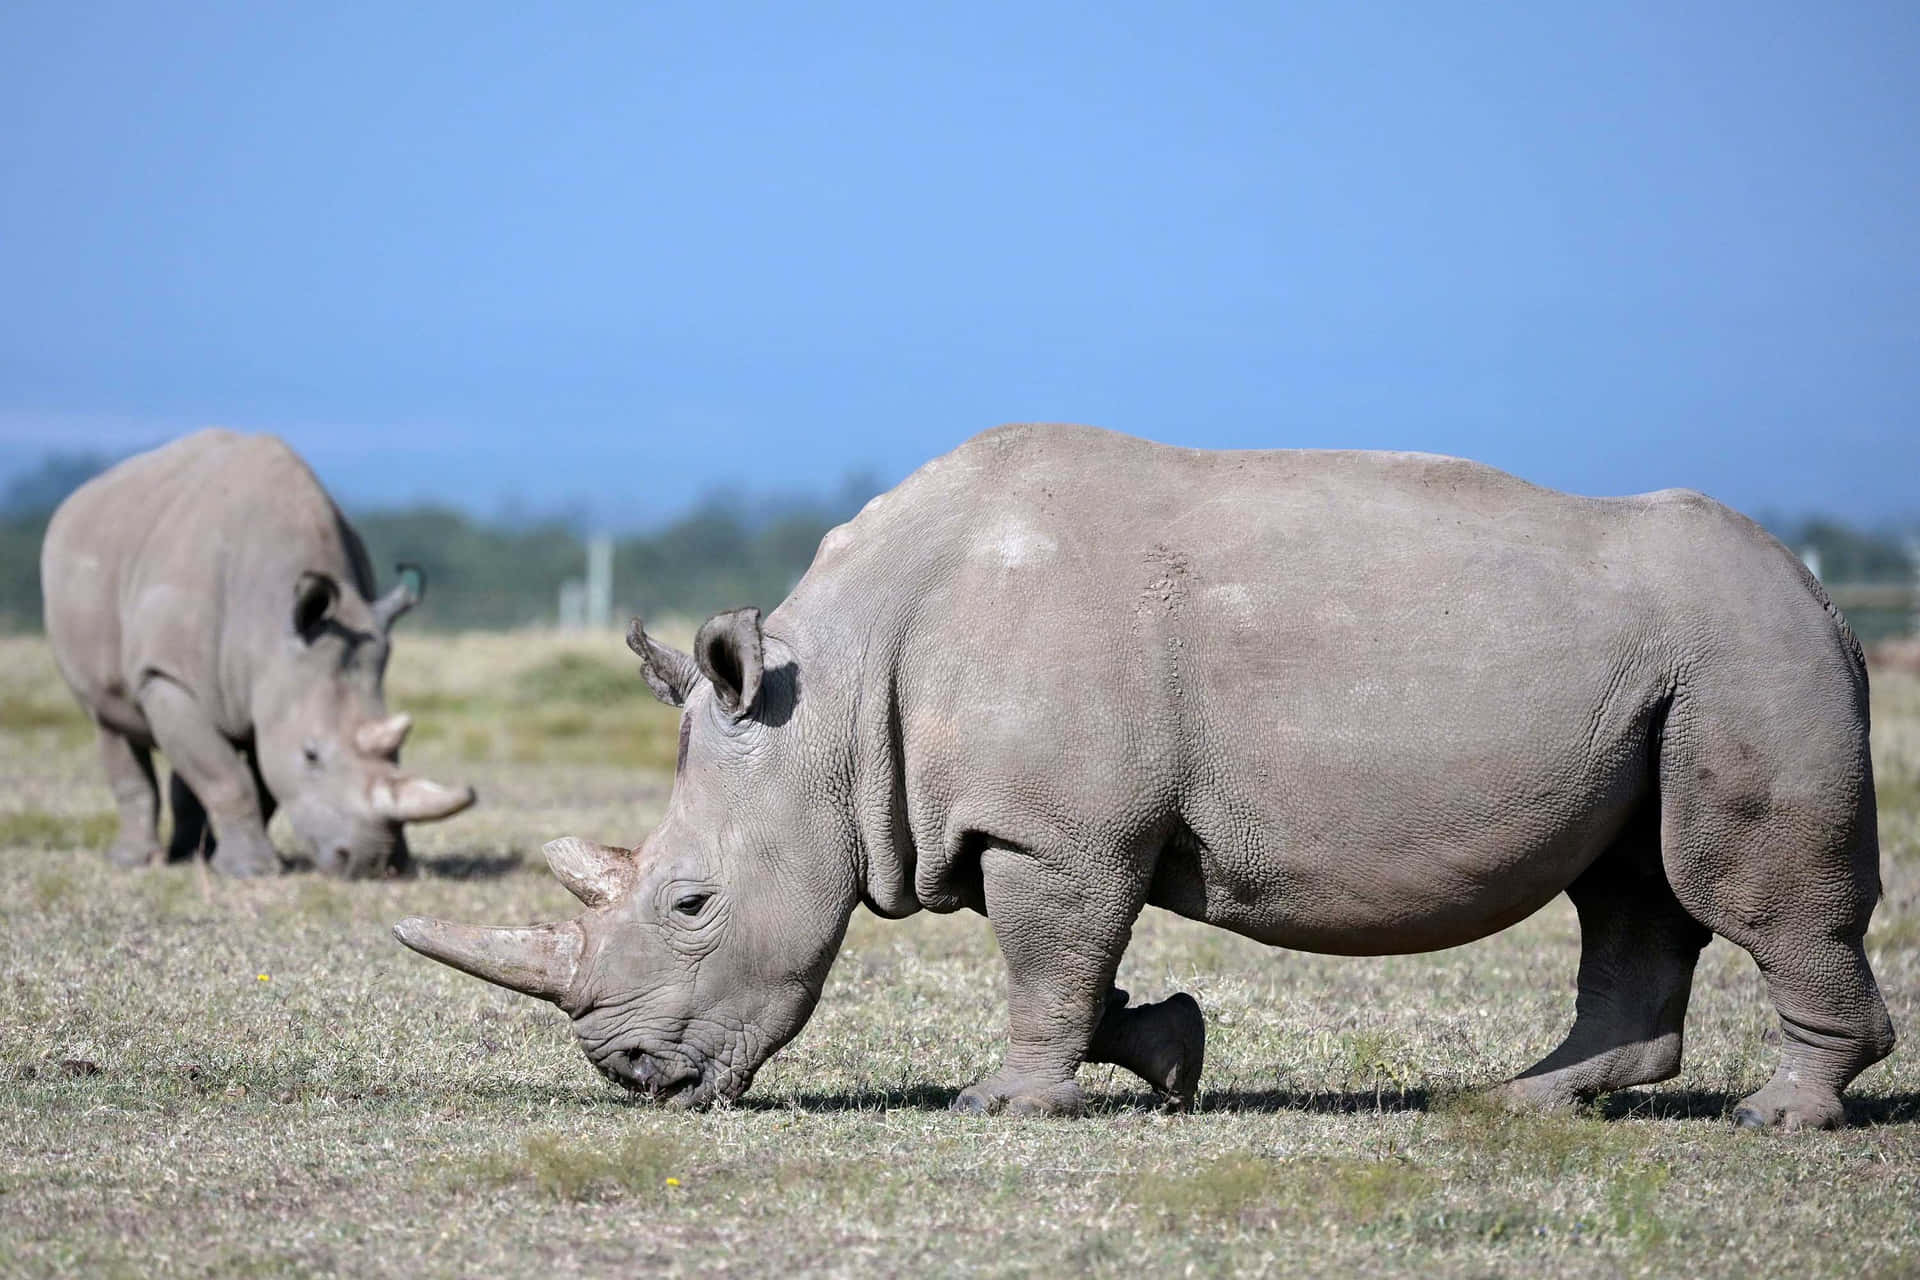 One of Nature's Greatest Creations - The Rhinoceros